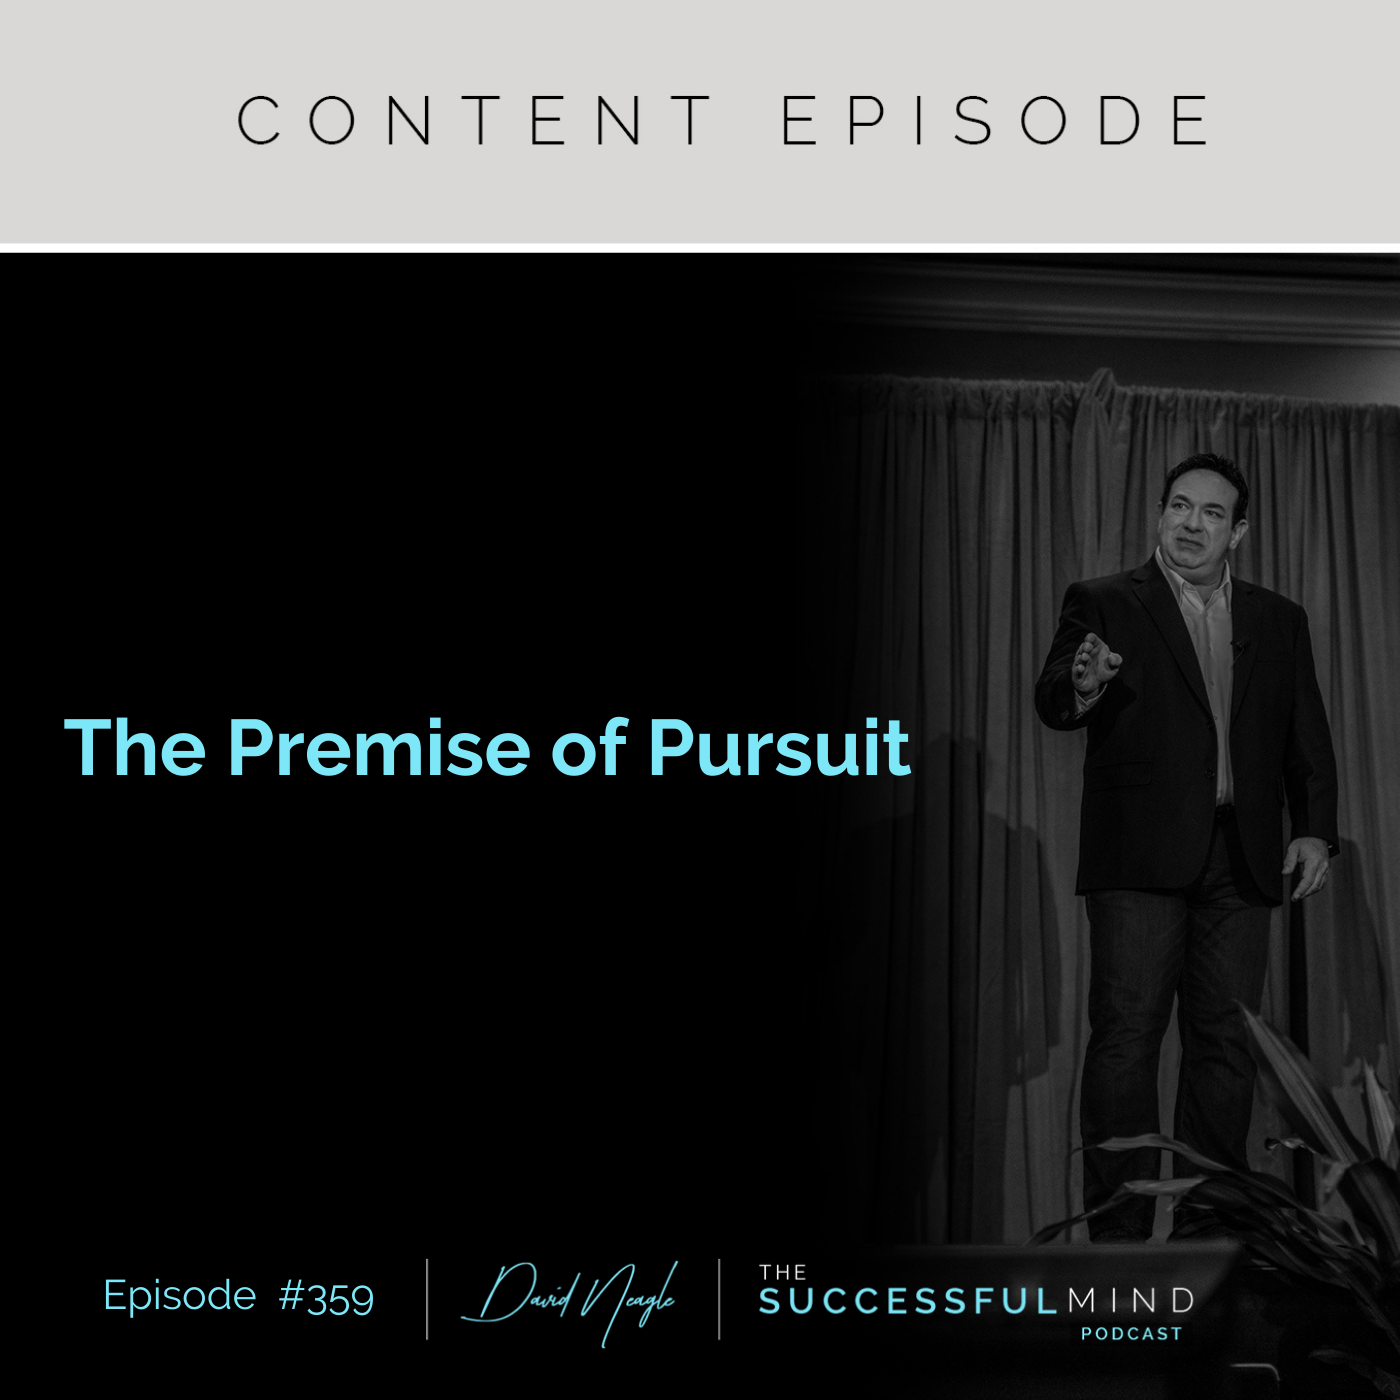 The Successful Mind Podcast - Episode 359 - The Premise of Pursuit